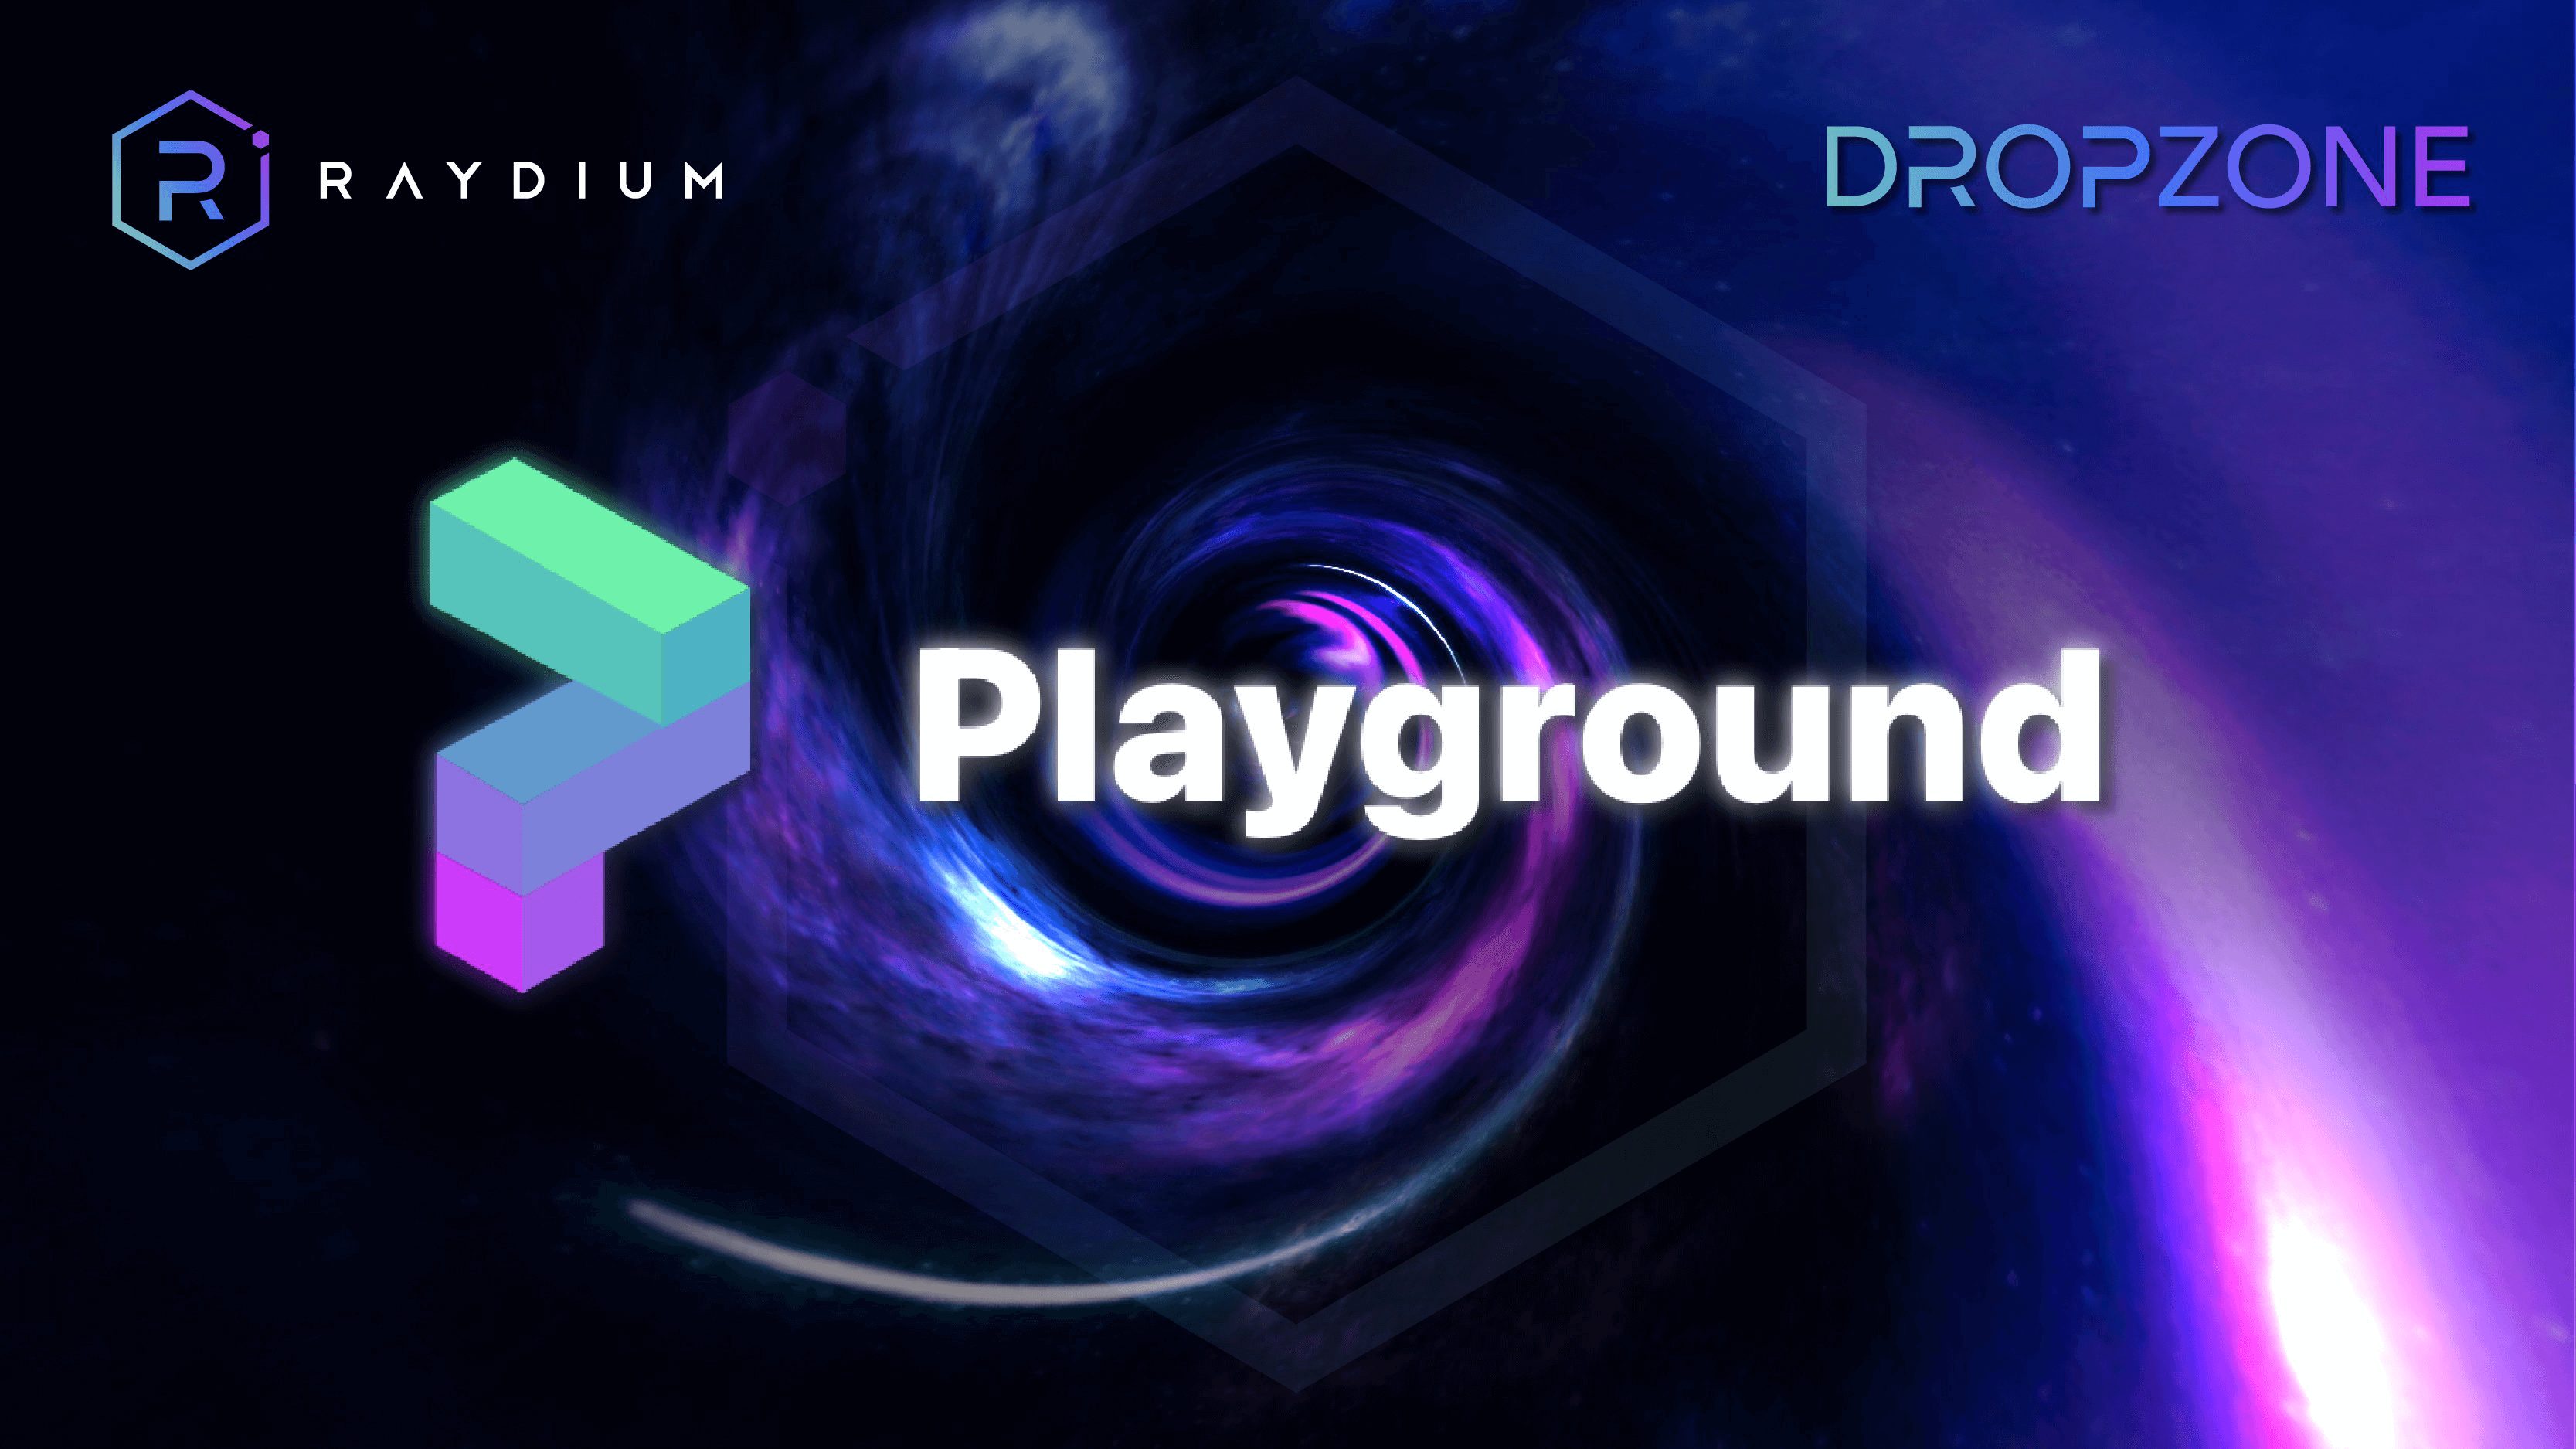 Playground’s Waves Launching on DropZone